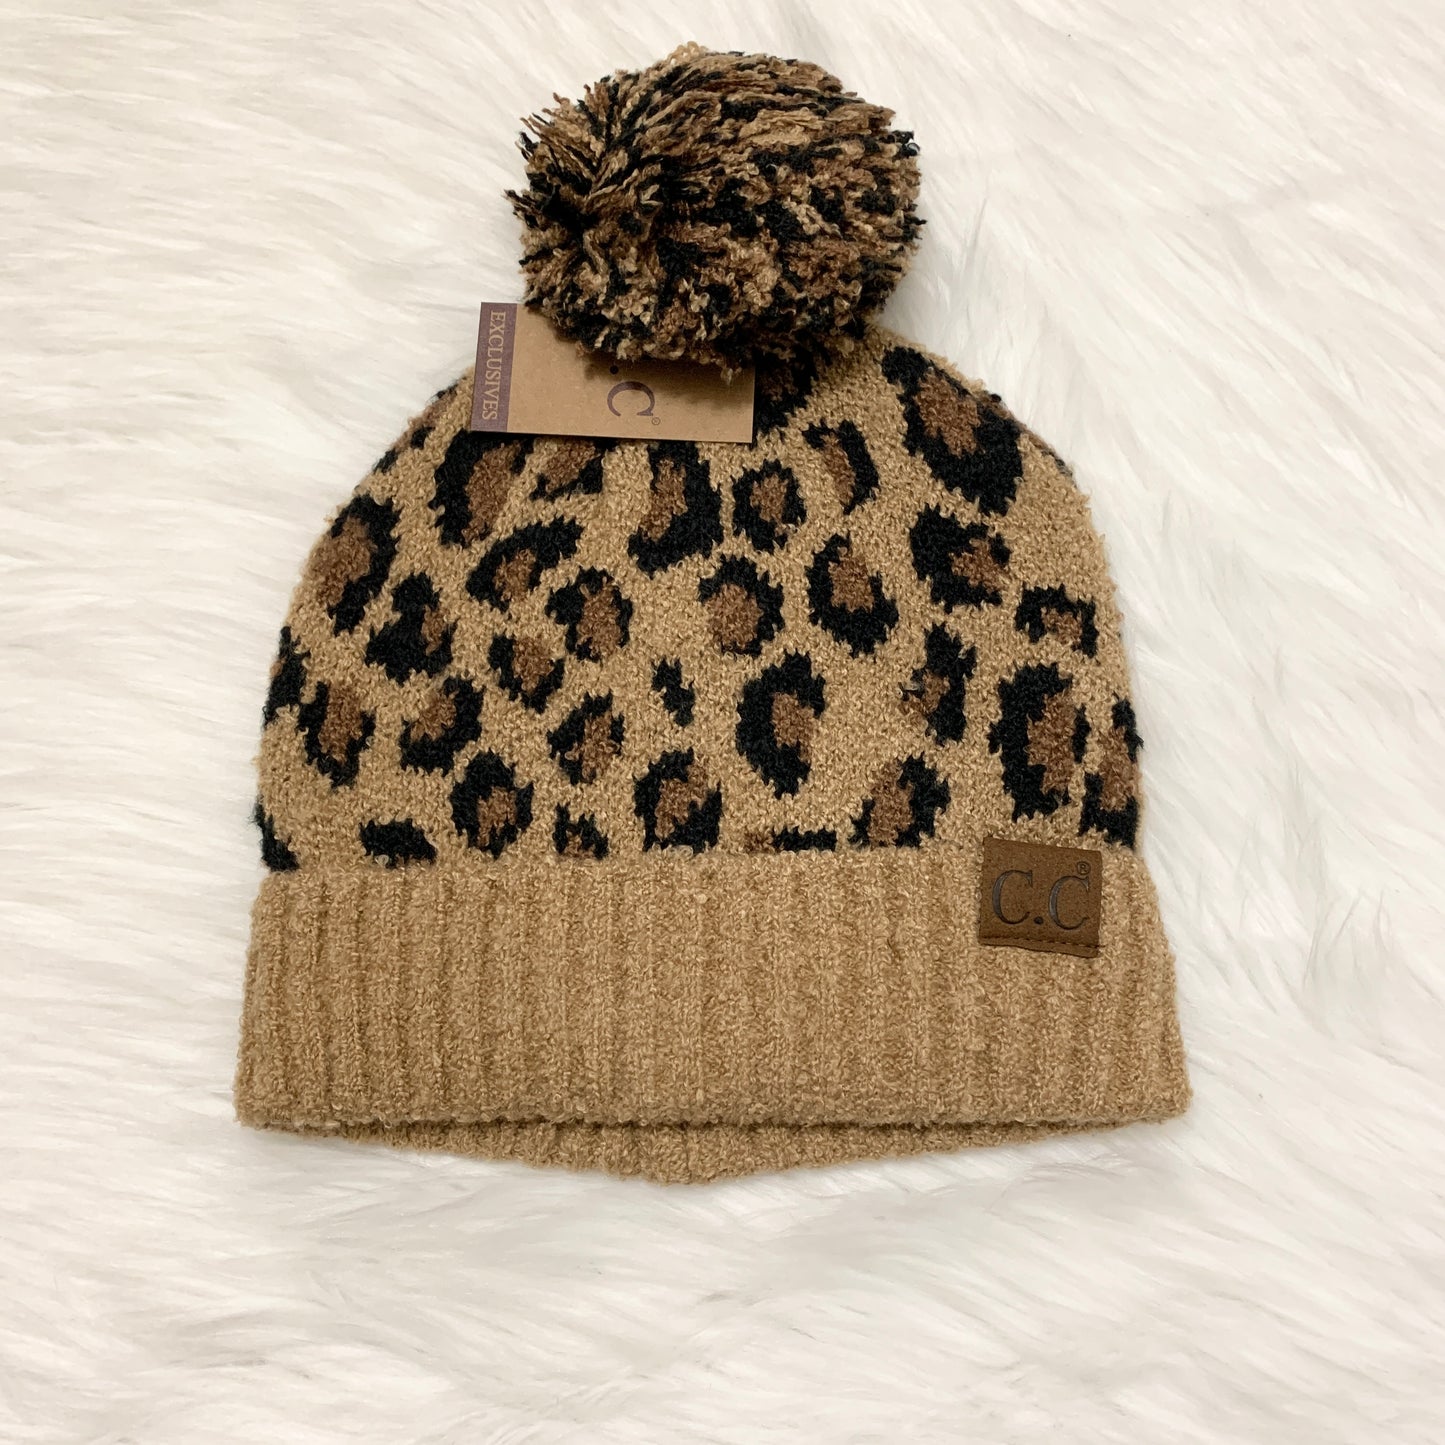 C.C Beanies Chunky Filled Leopard Pom Beanie for Adults, Winter Hats, Premium Hats, Warm Hats, Winter Accessories, CCBeanies, CC Leopard Hat